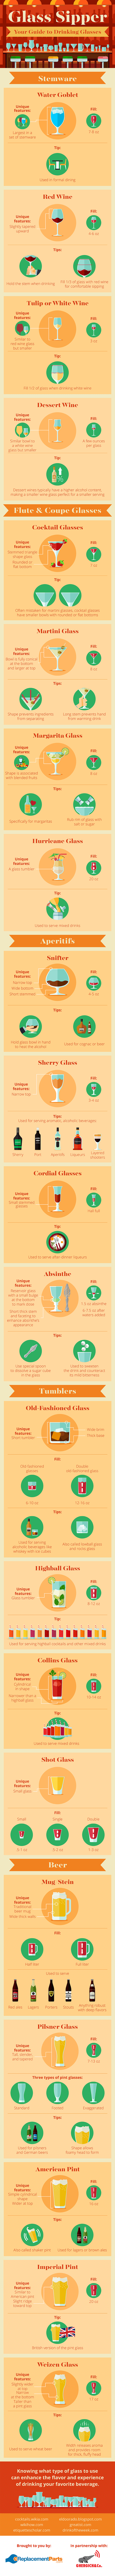 How to Choose Cocktail Glasses